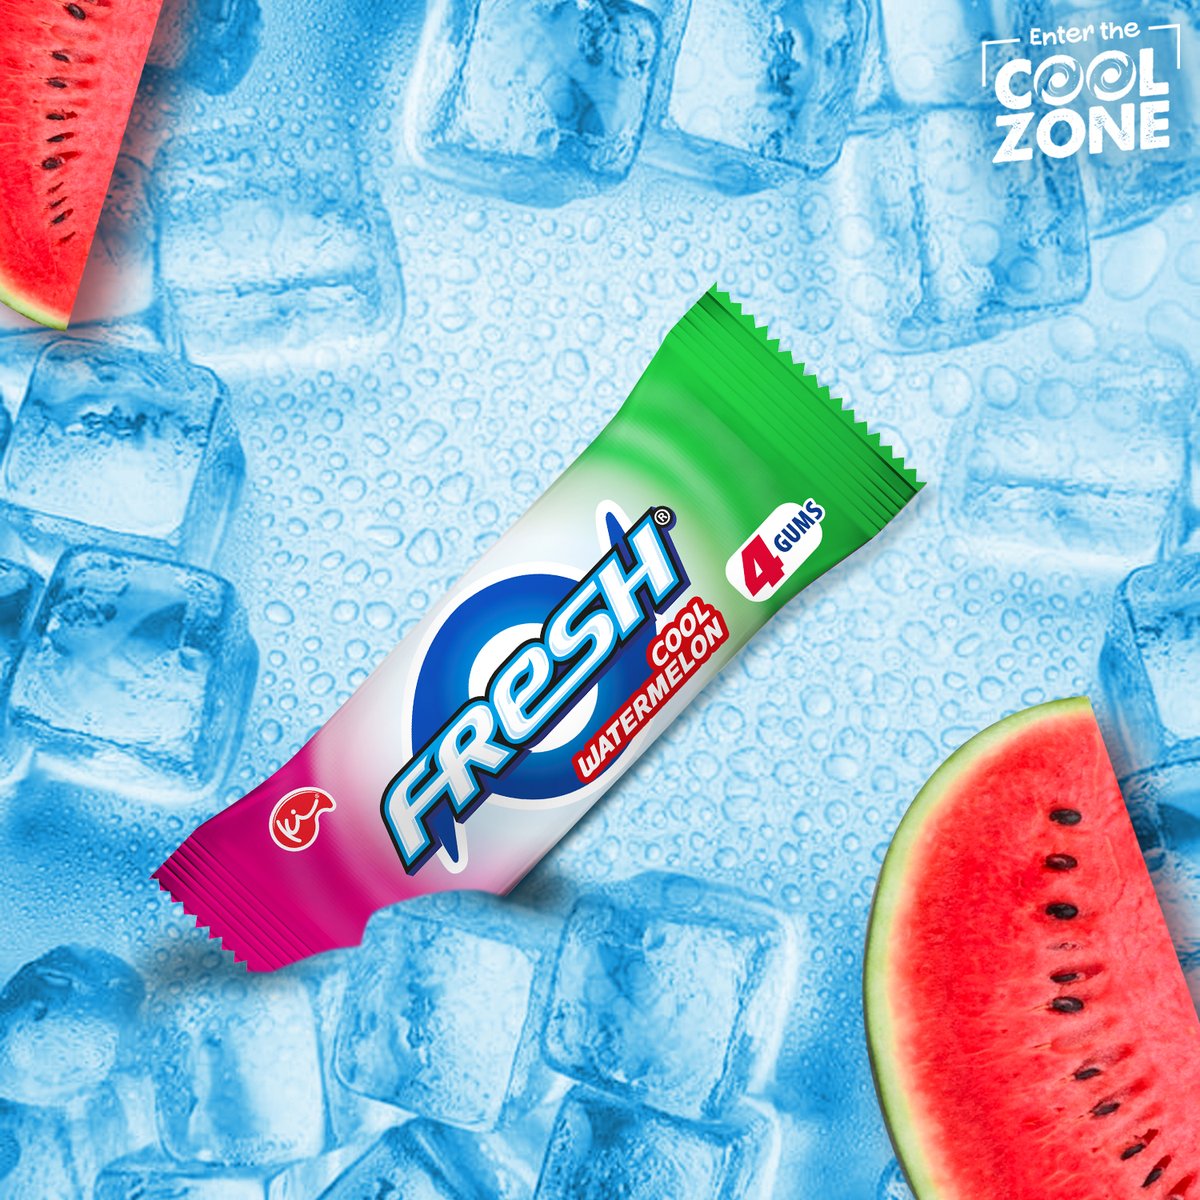 Chewing Fresh Watermelon is like taking your tastebuds to Diani. Let’s go on holiday! #EnterTheCoolZone #FreshChewingGum